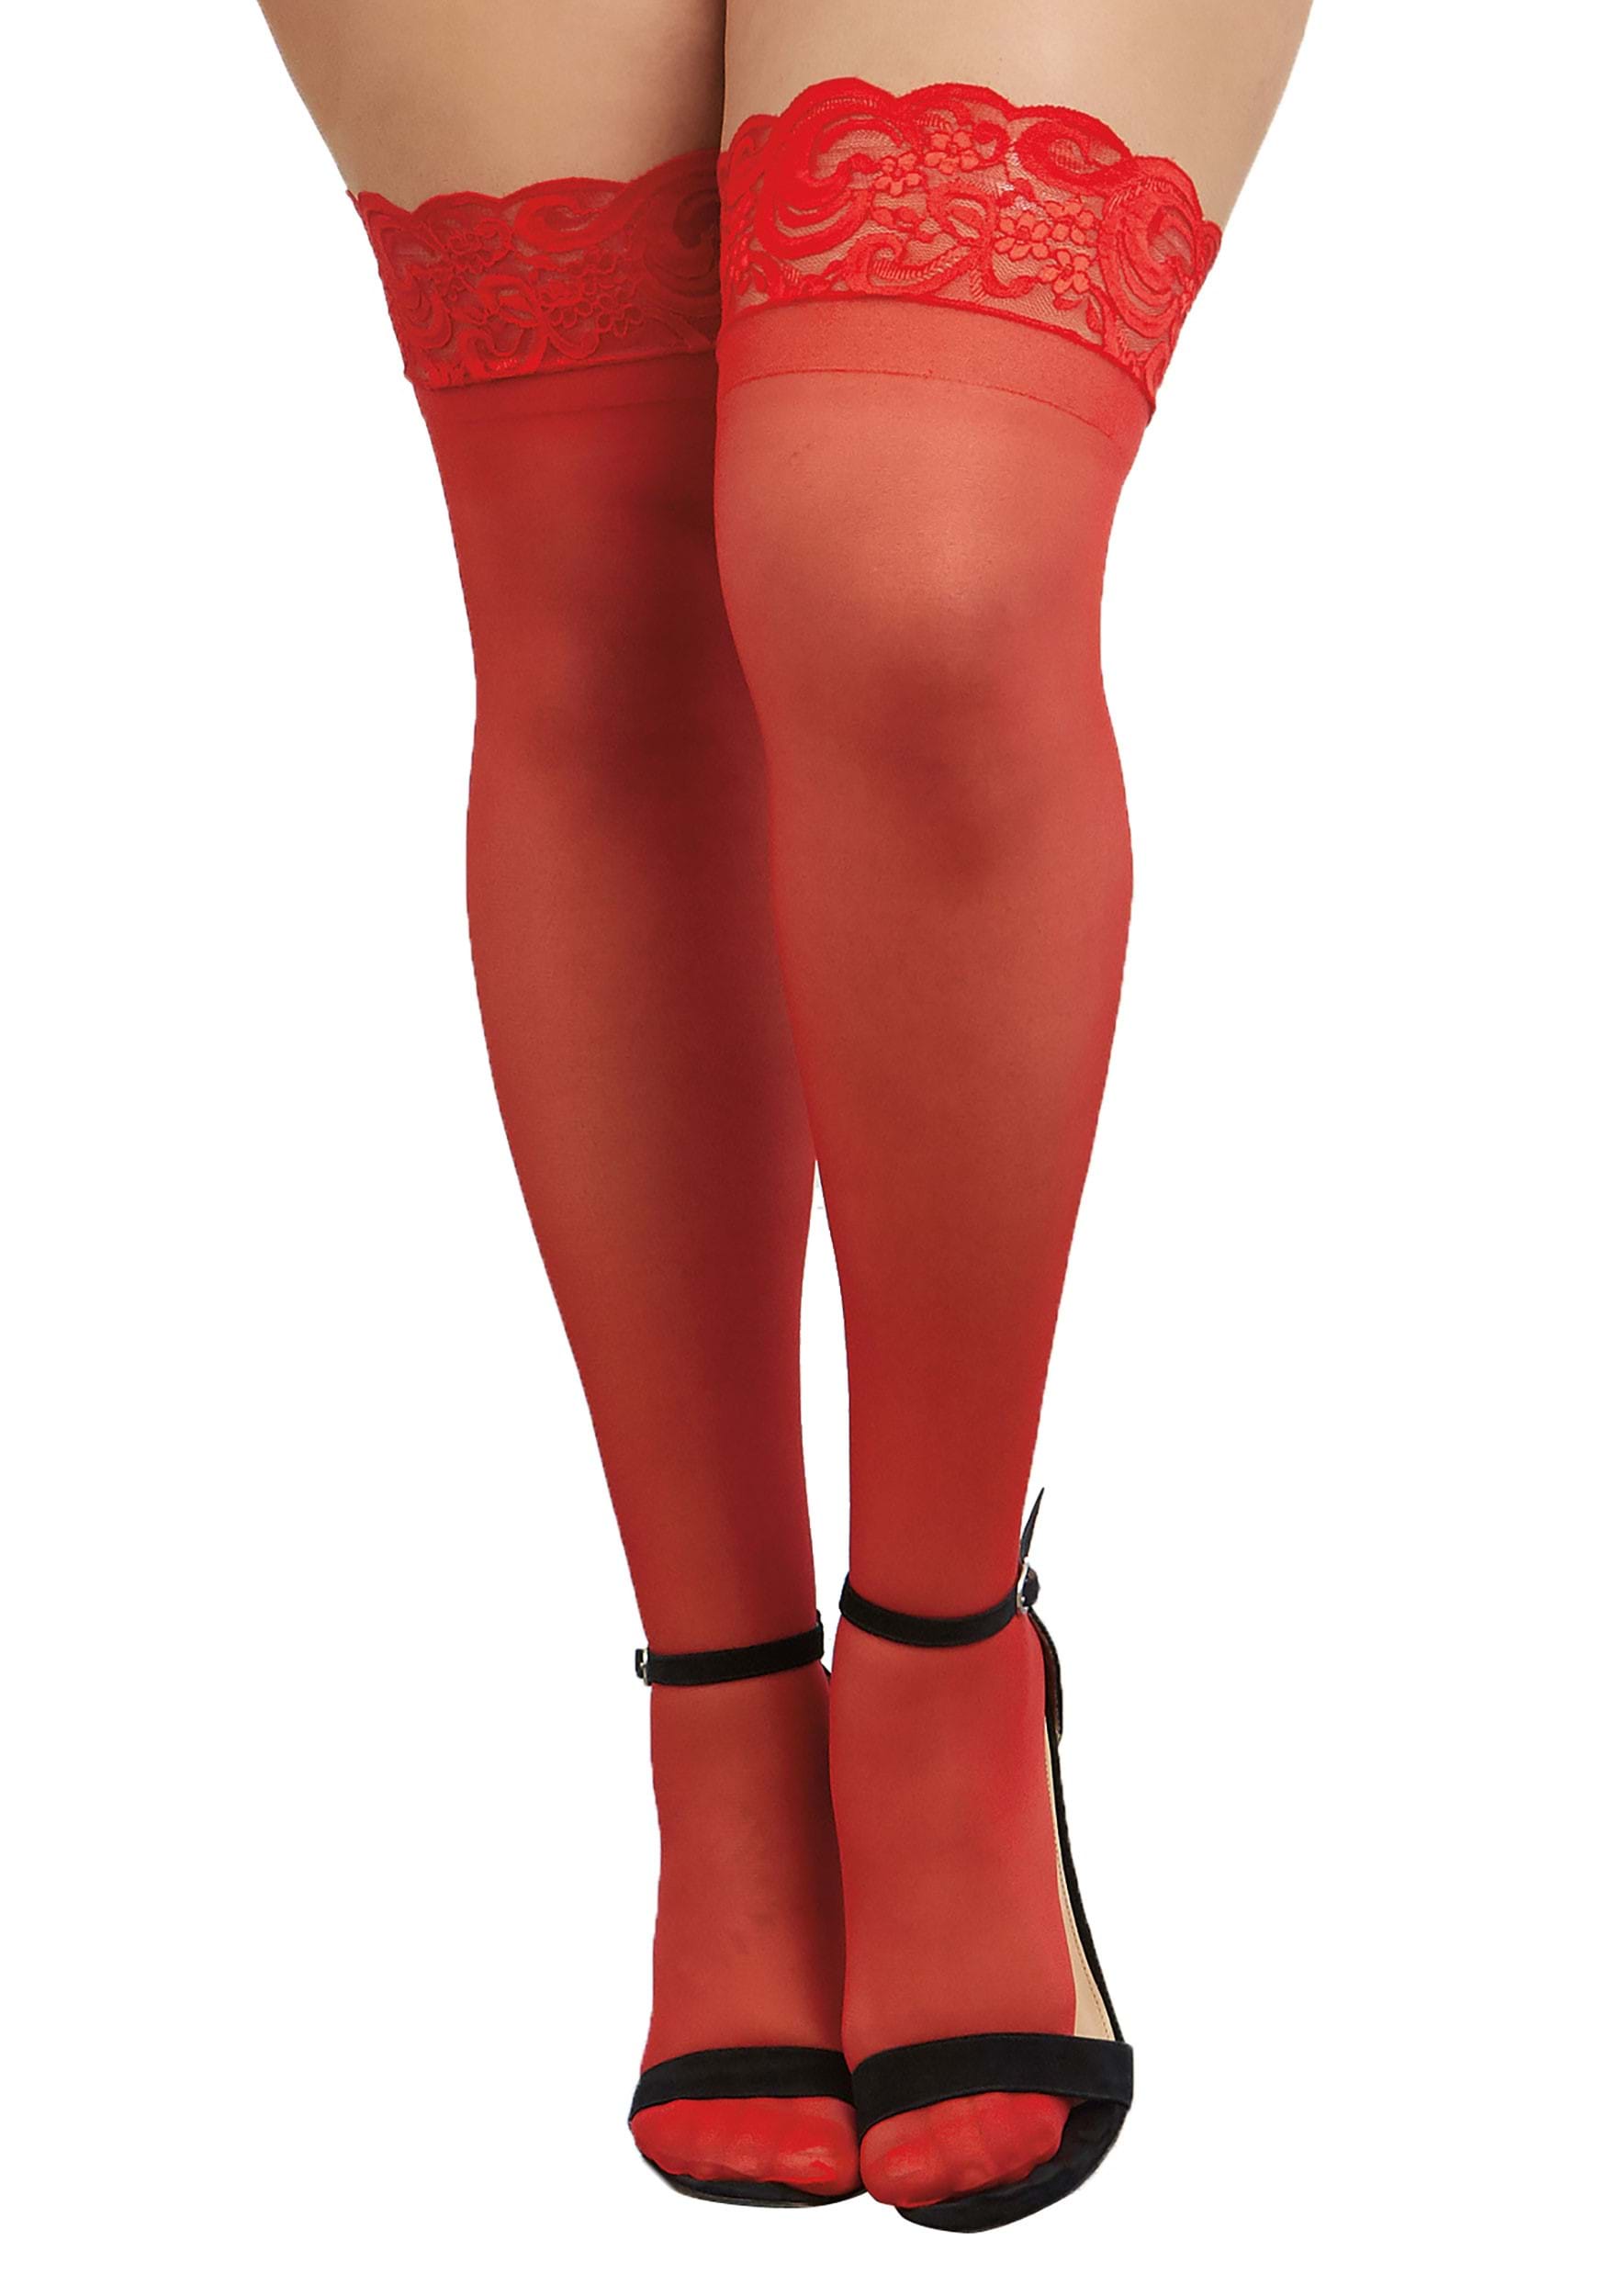 Women's Plus Size Red Sheer Thigh High Stockings with Scalloped Lace Top